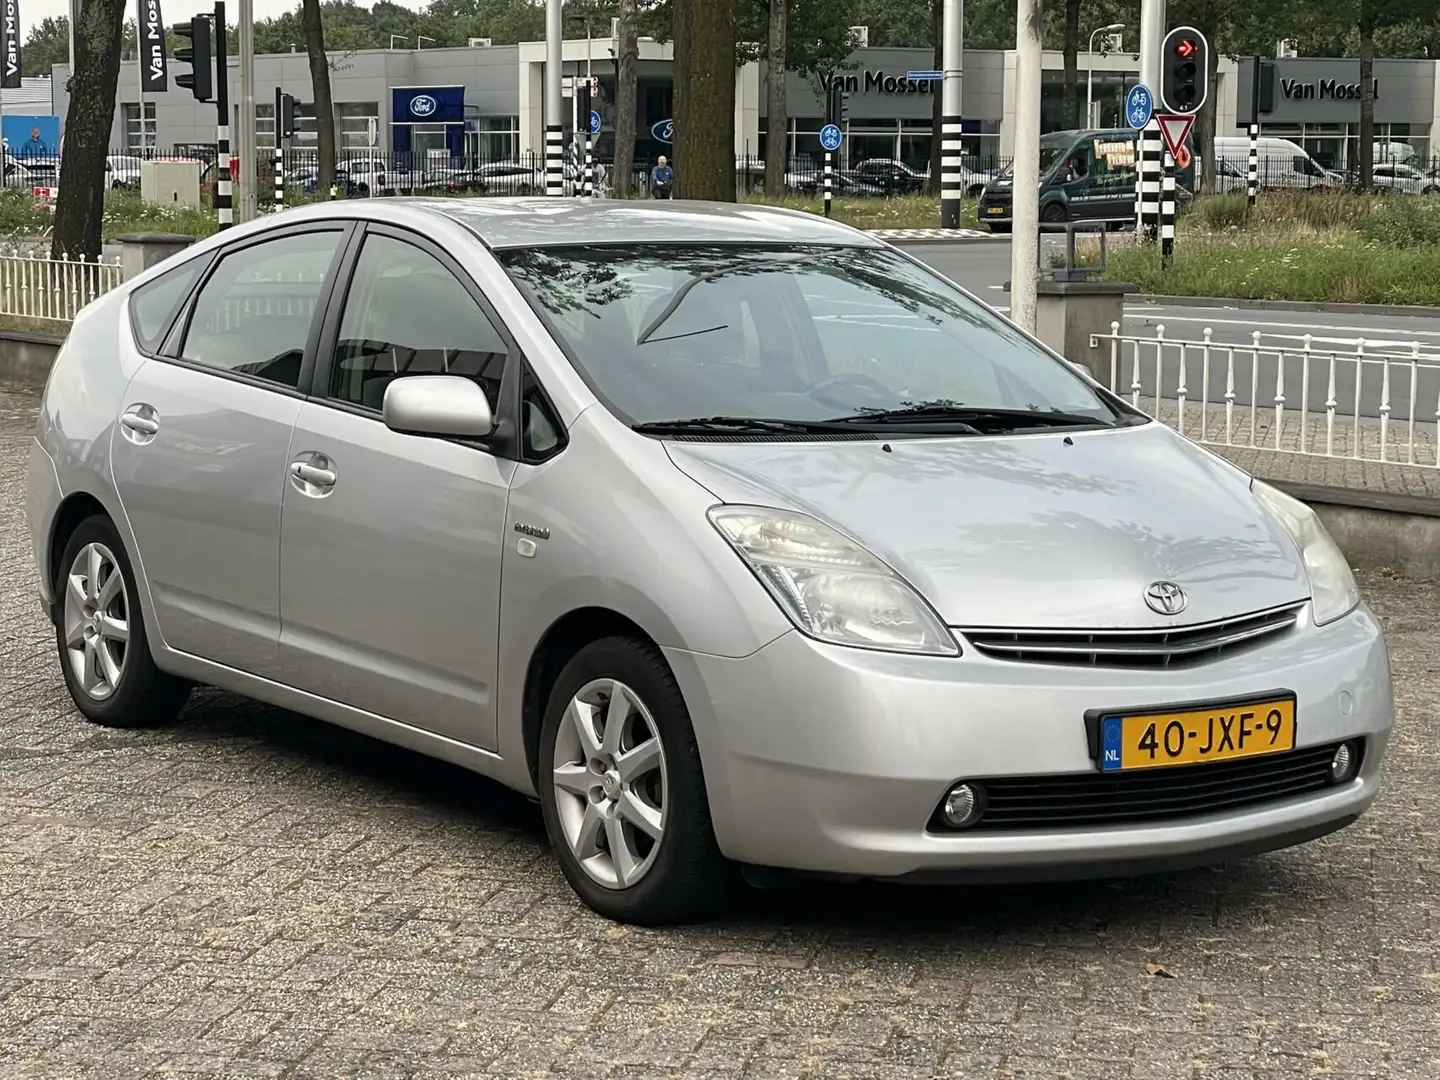 Toyota Prius 1.5 VVT-i Bns Edition Hybrid Automaat 2009 Gris - 2